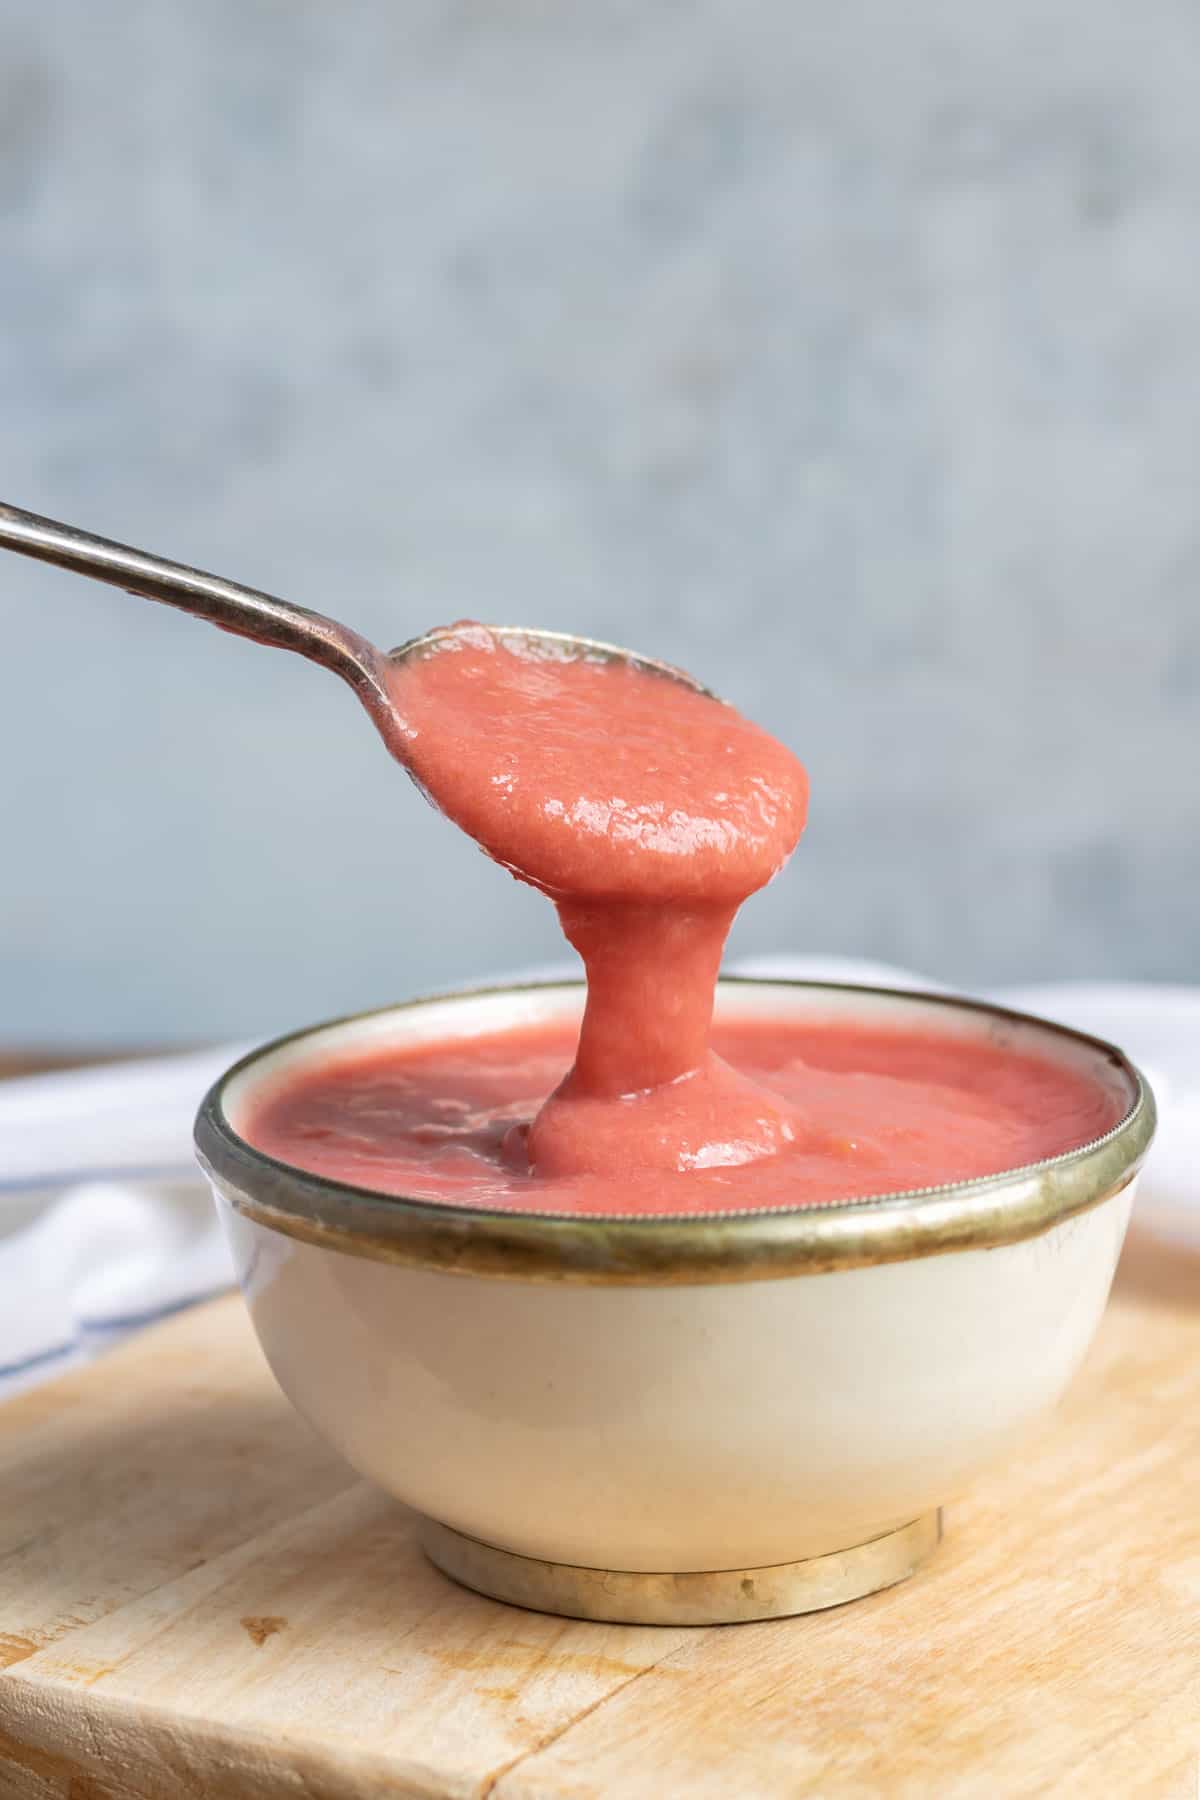 Spoonful of sauce coming out of a bowl.